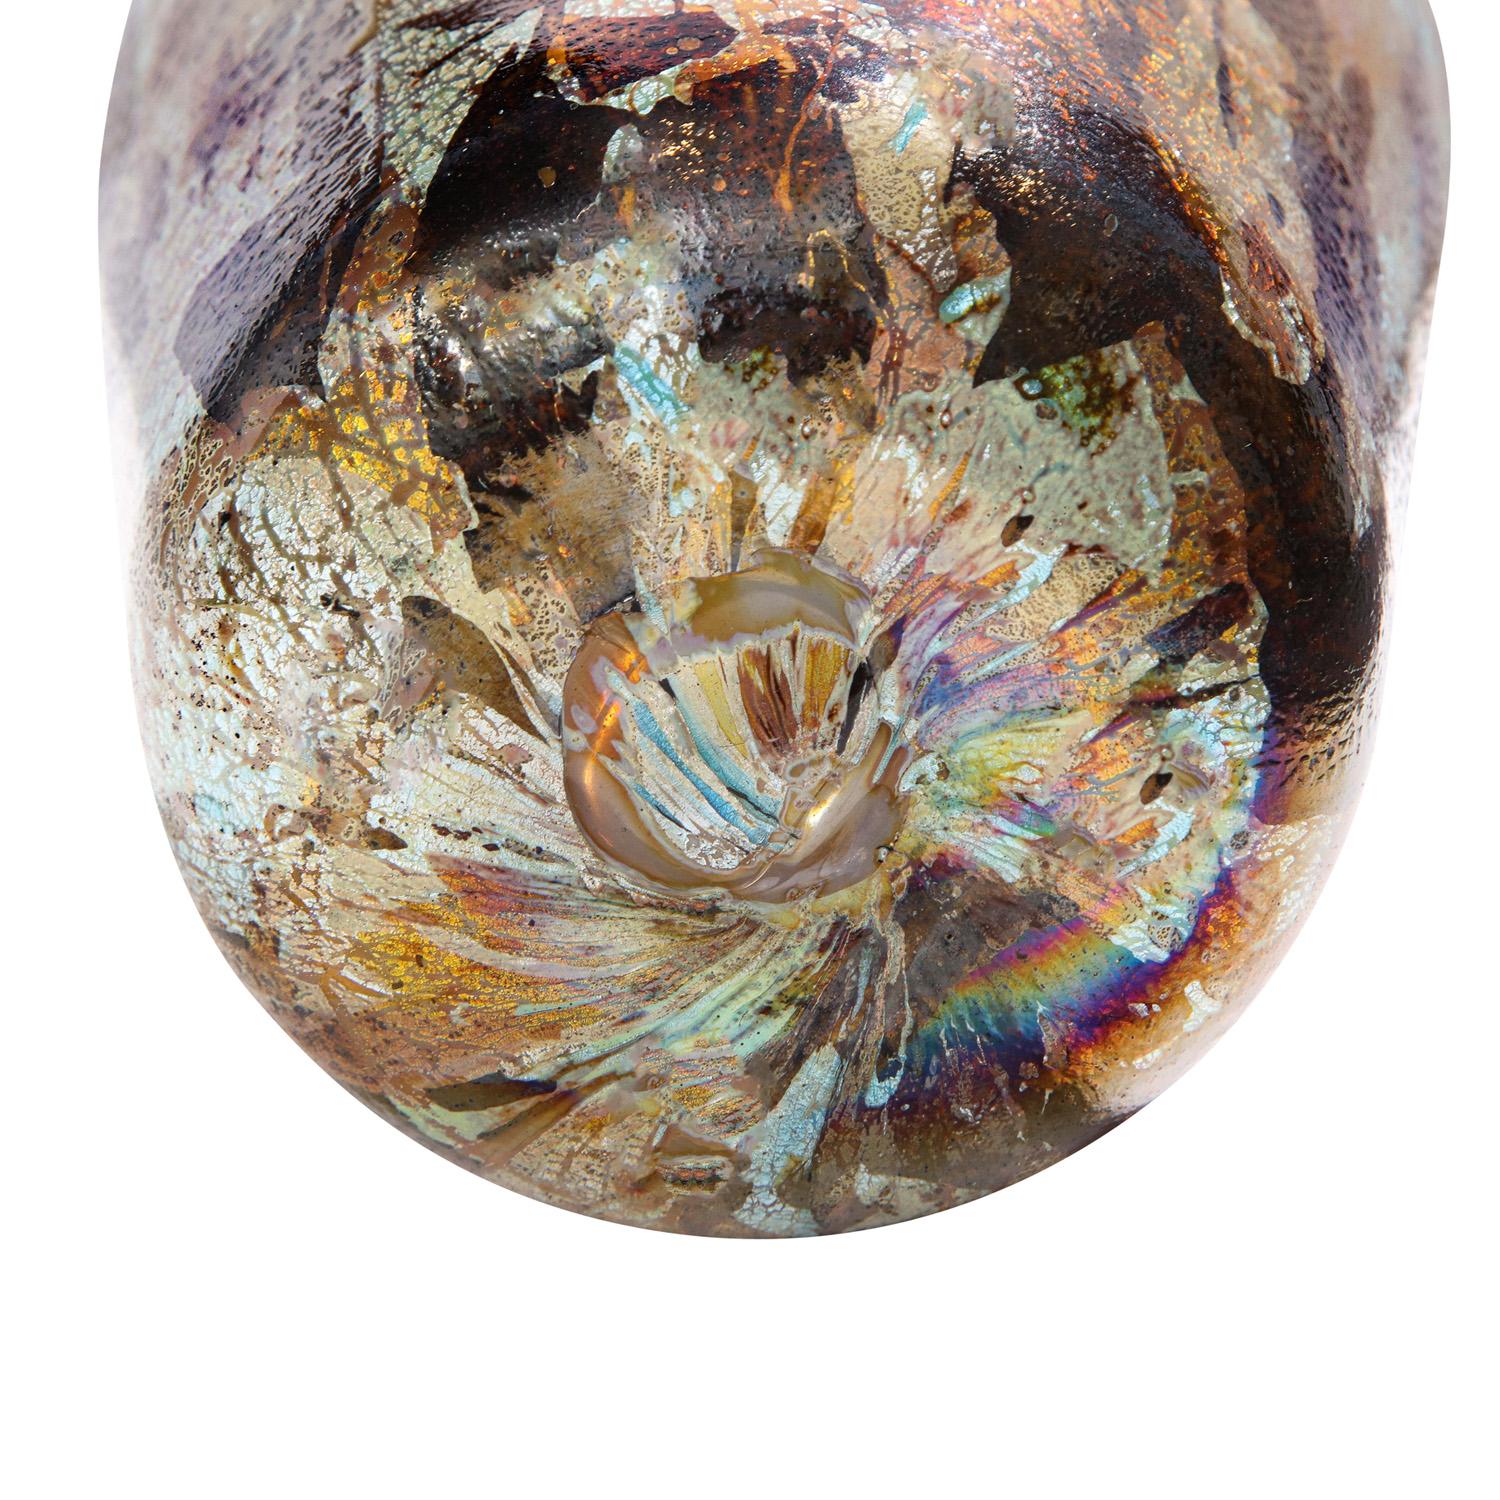 Hand-Crafted Aldo Nason Handblown Glass Vase with Gold and Silver Foil 1960s For Sale